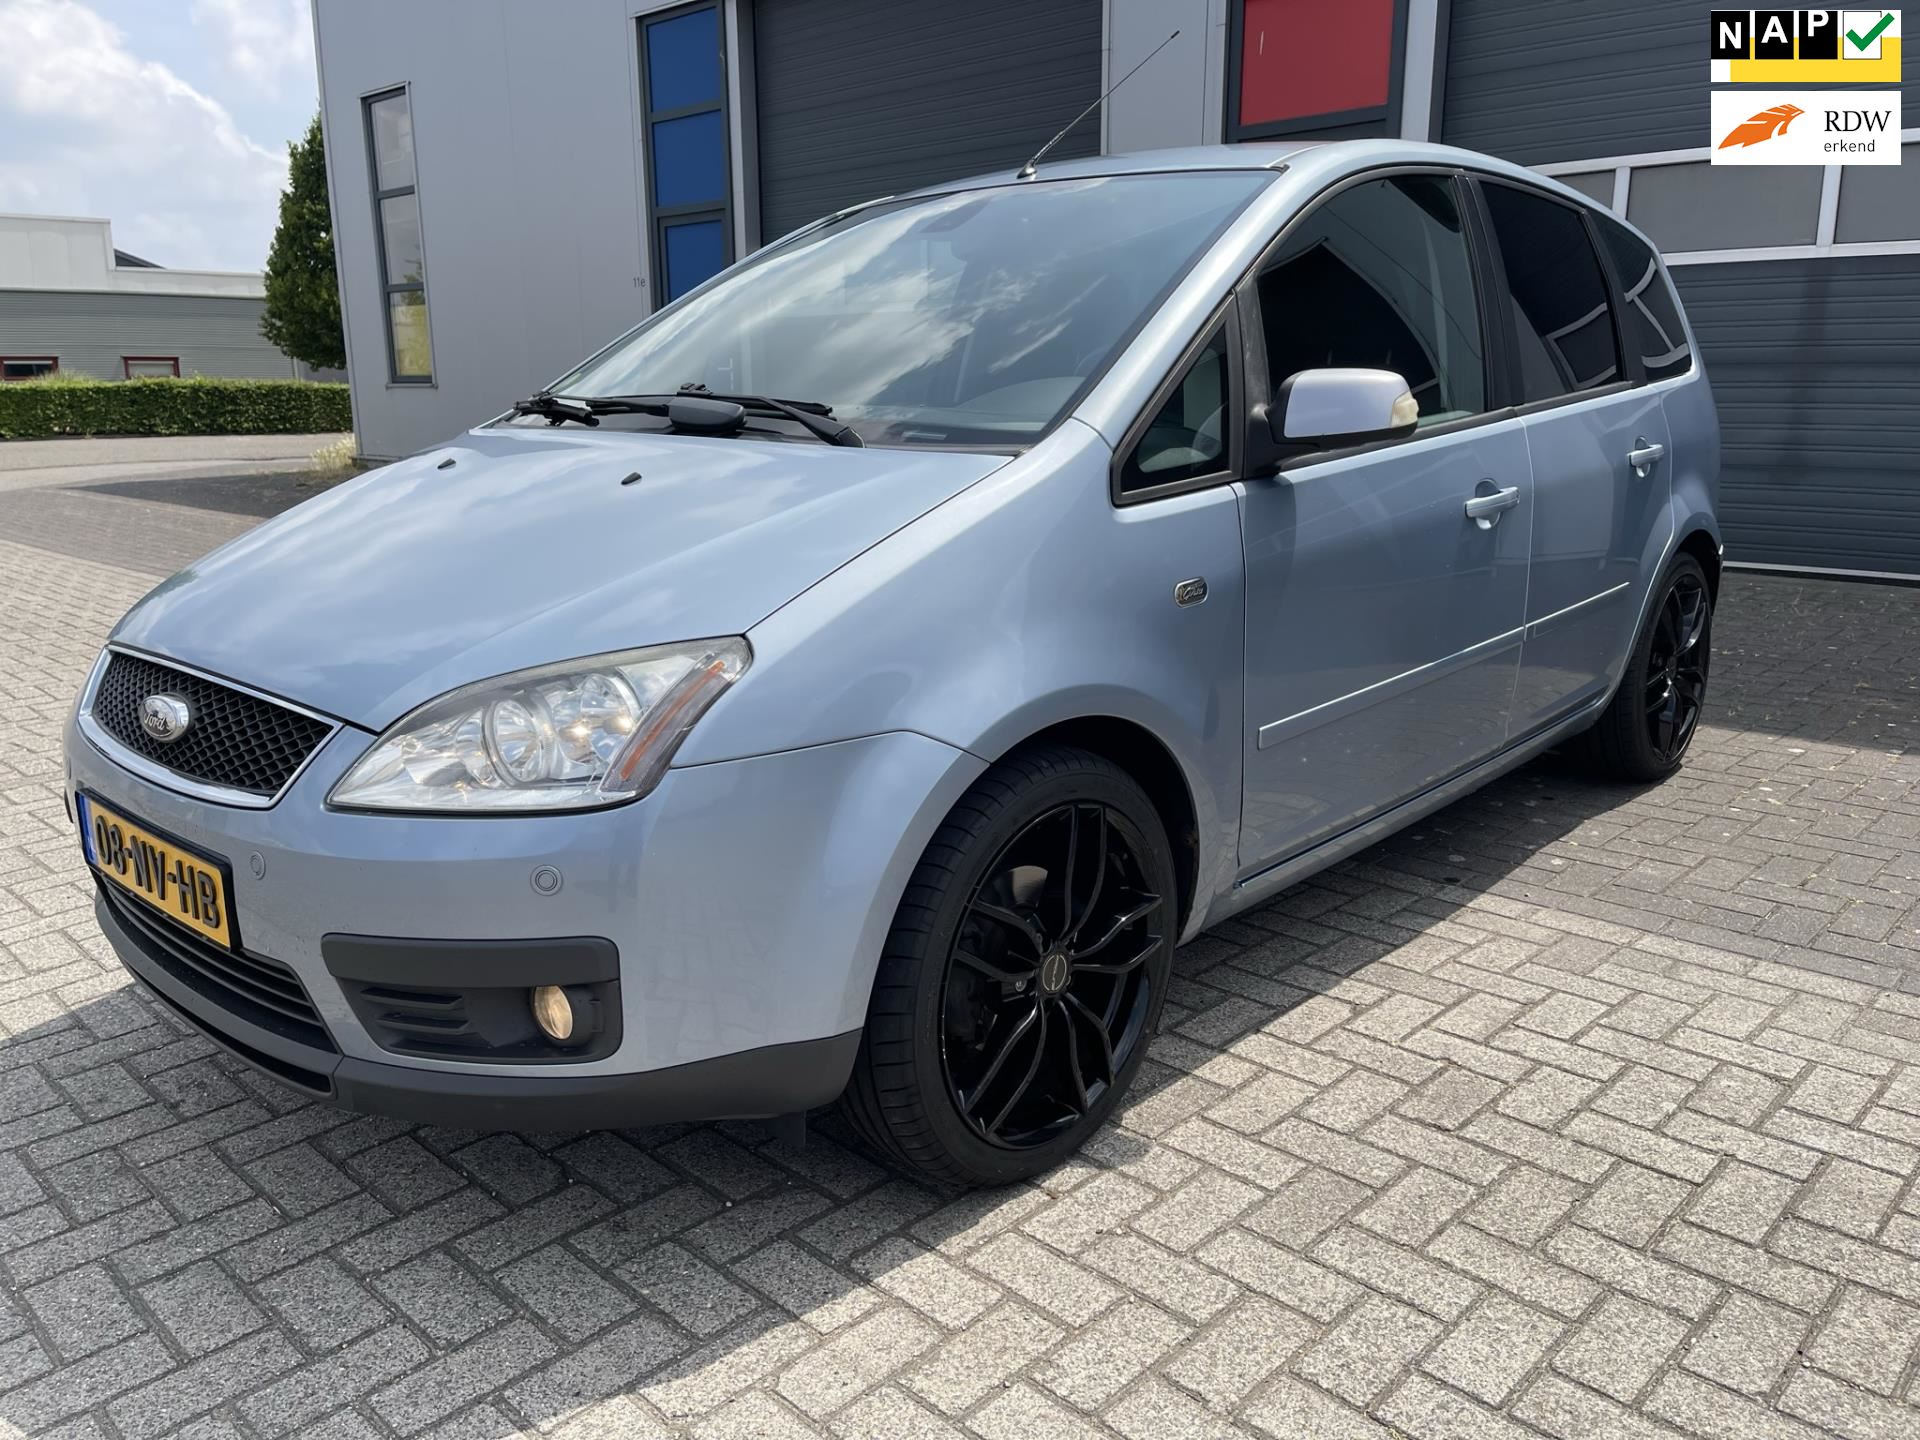 Ford Focus C-Max 1.8-16V Ghia occasion - Hulst Automotive